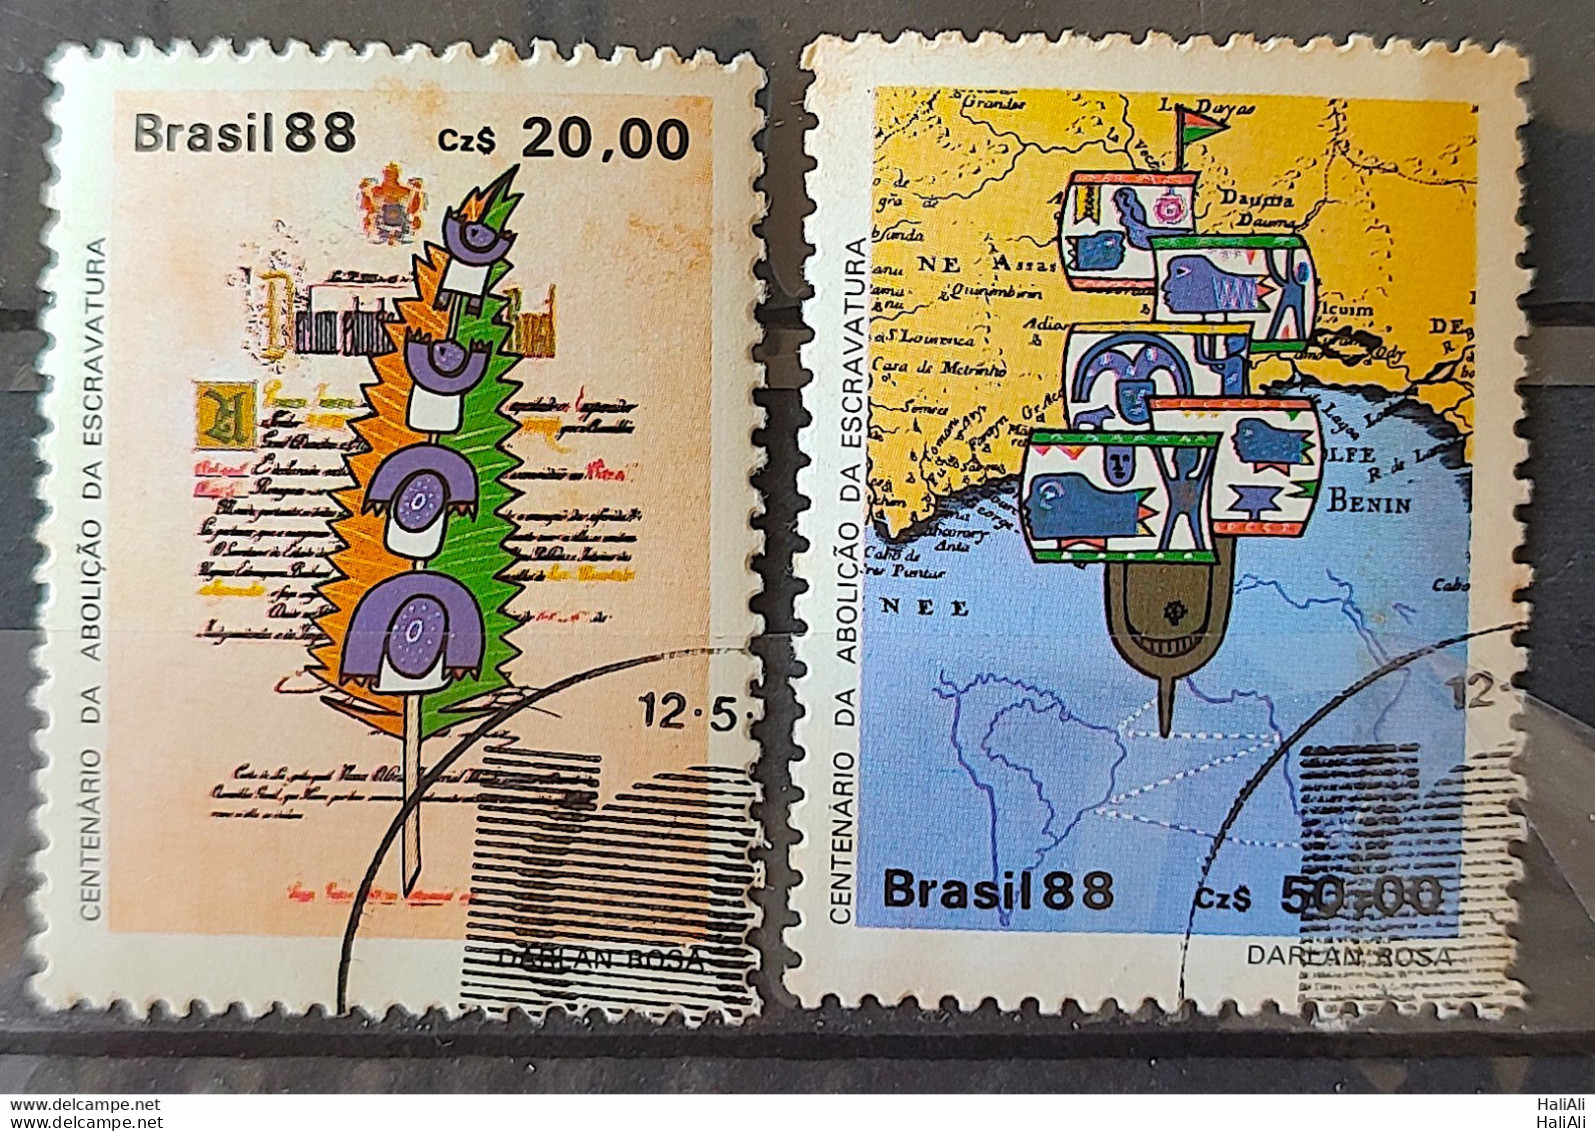 C 1583 Brazil Stamp 100 Years Abolition Of Slavery Law Aurea Ship Slave 1988 Complete Series Circulated 5 - Gebraucht